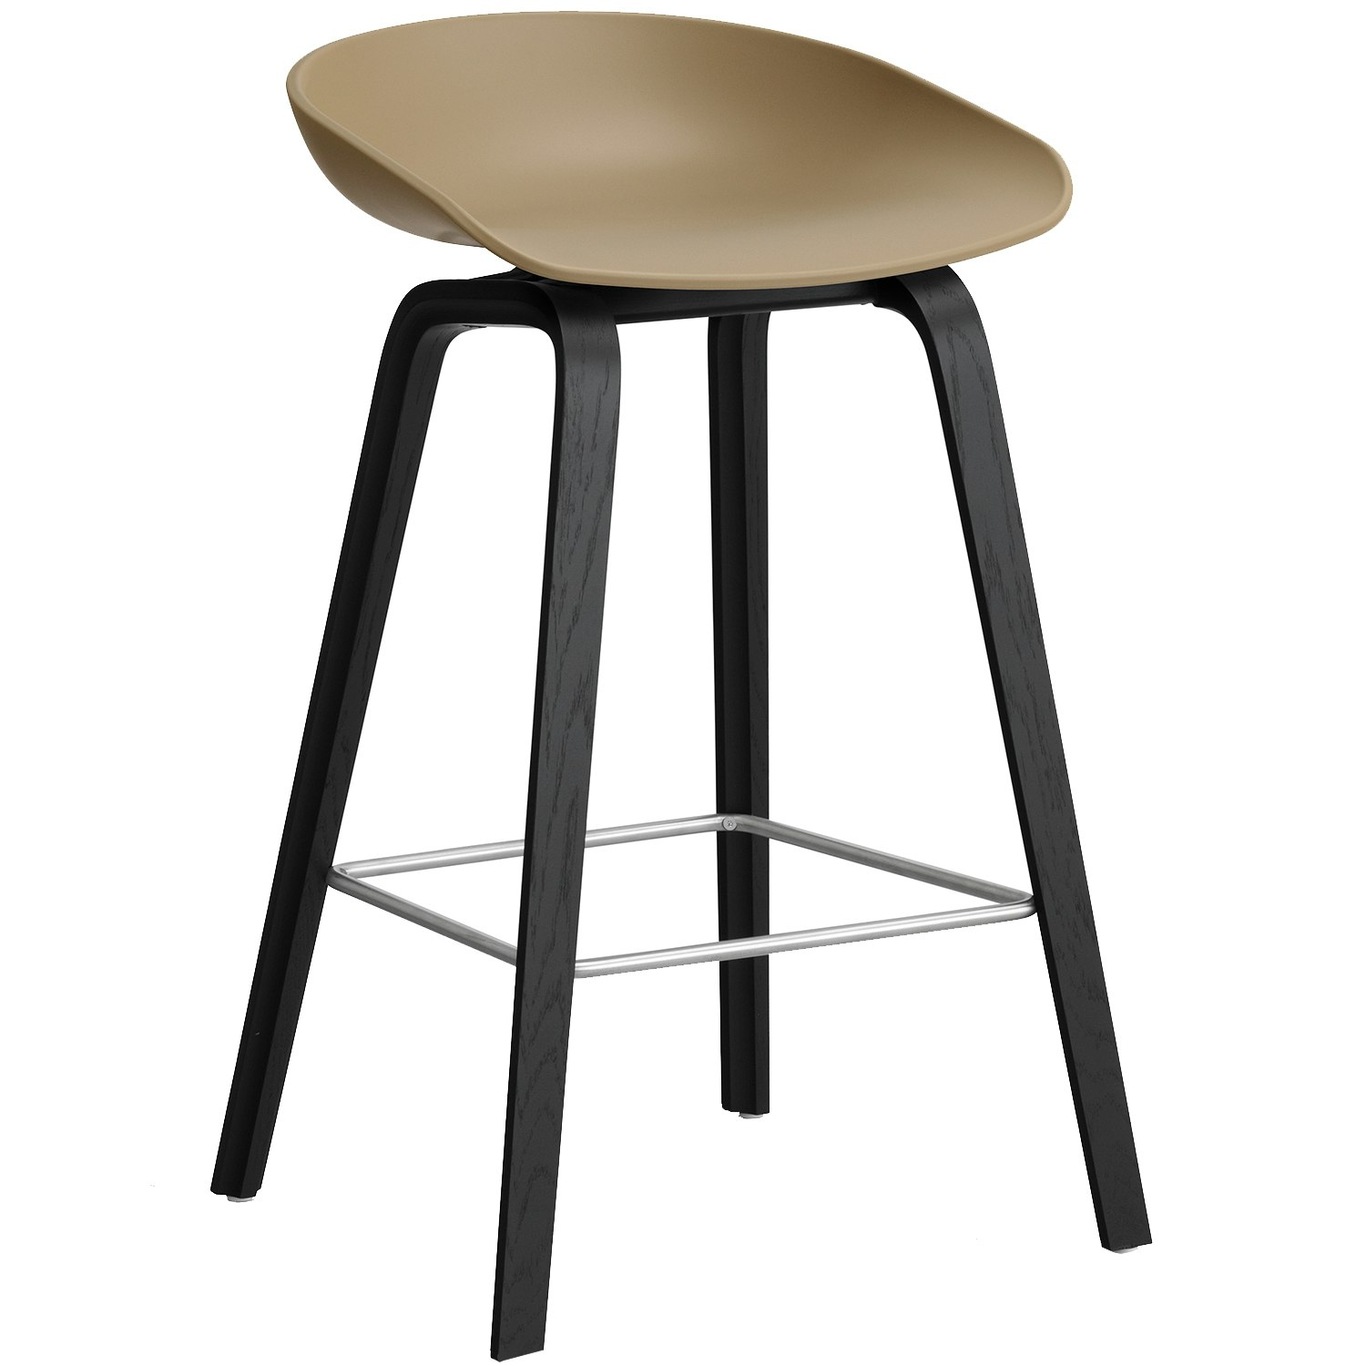 AAS 32 2.0 Bar Stool 65 cm, Black Lacquered Oak / Clay